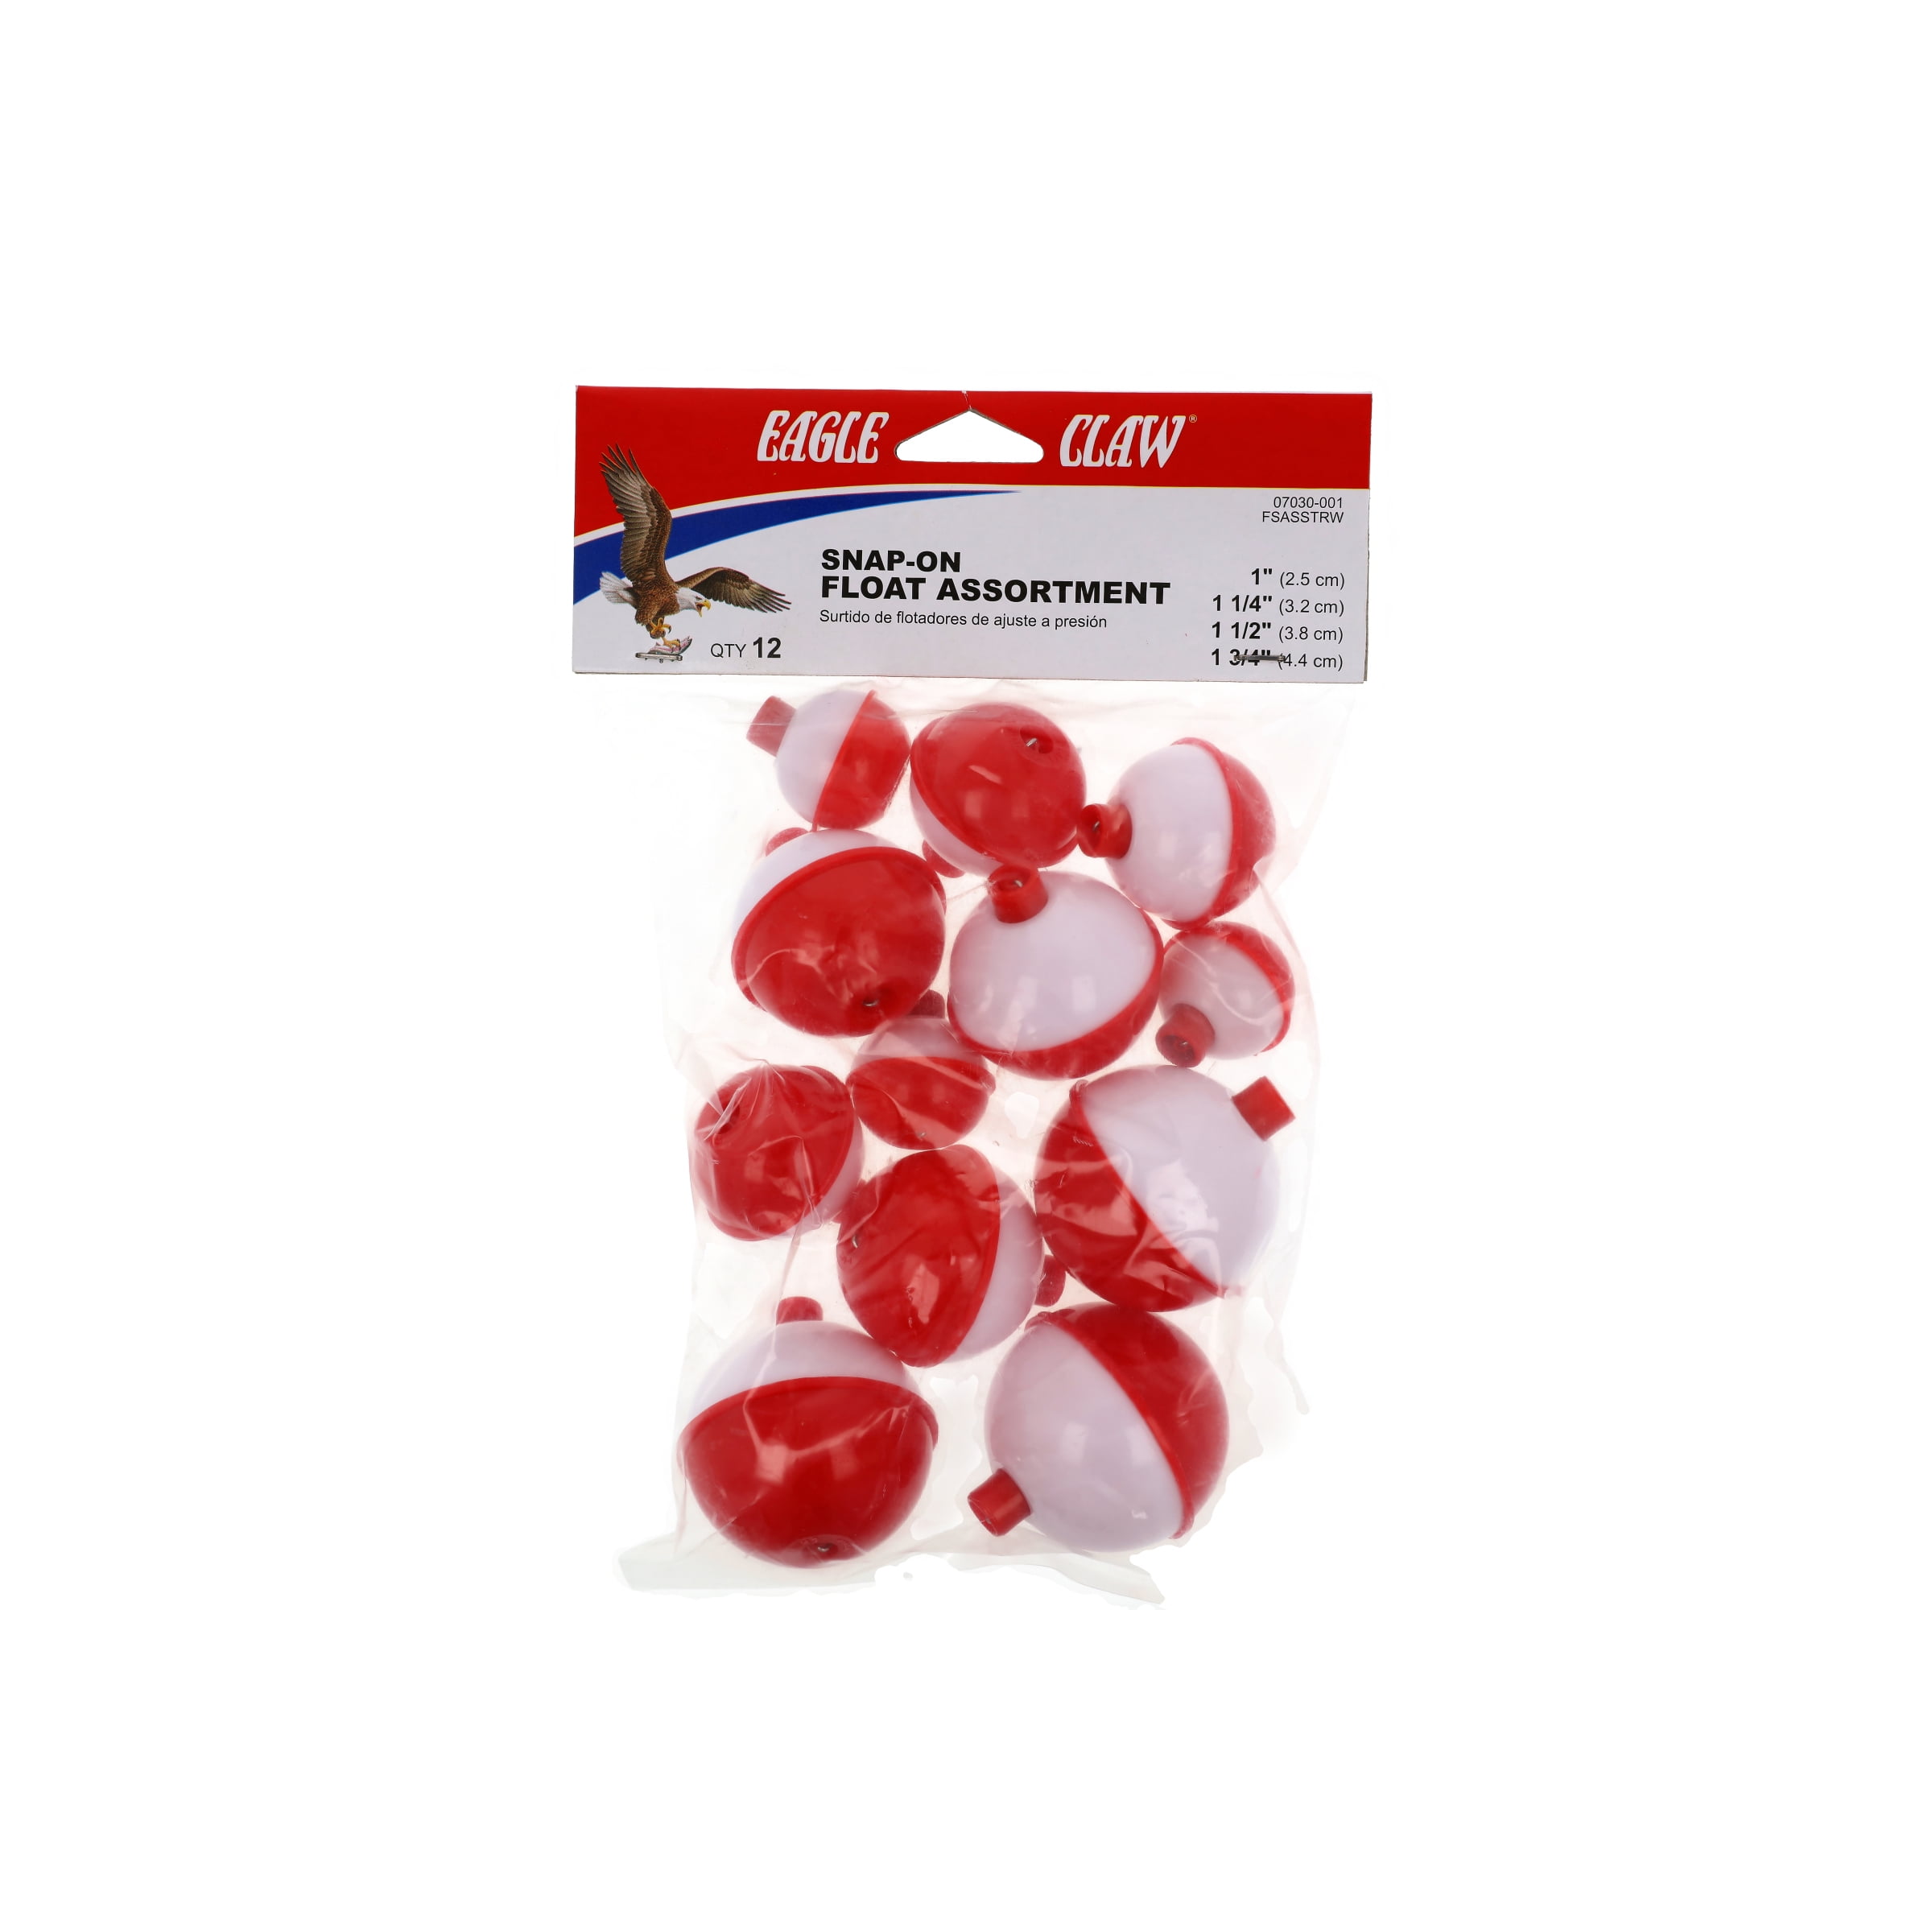 2 packages Size 1-1/2 Inch 5 per package Bobbers- Round Shape- Red/White 